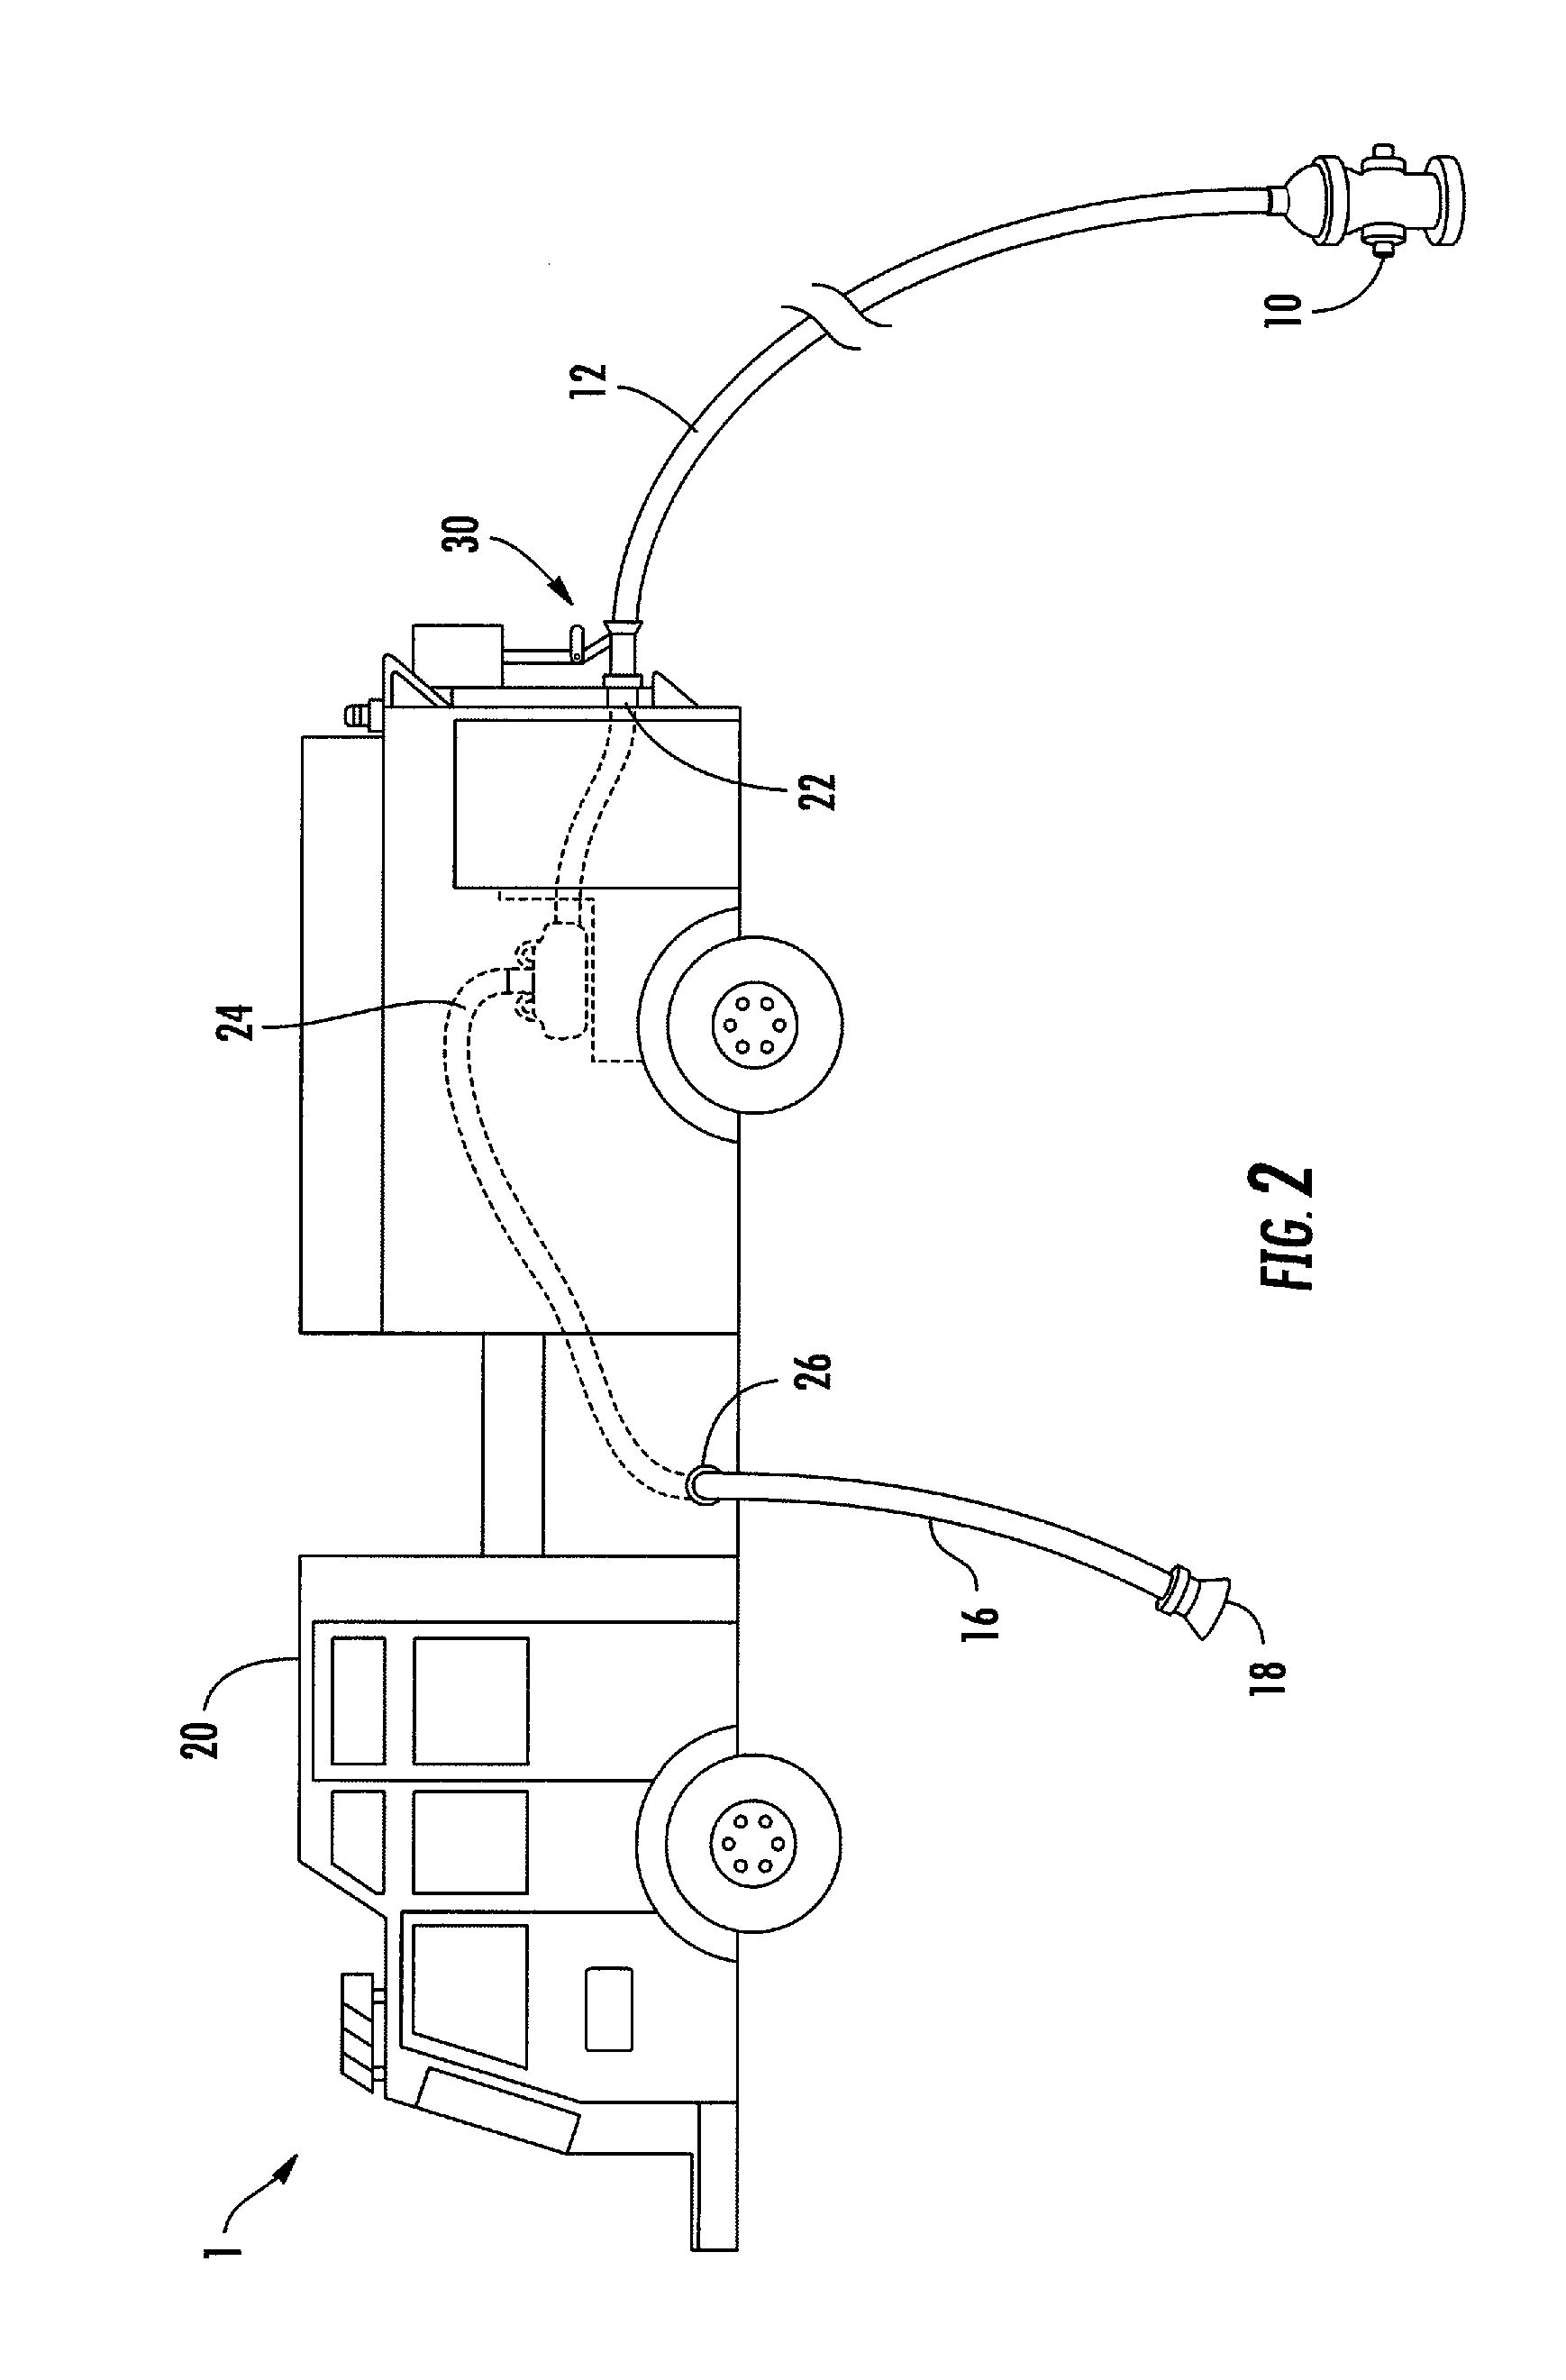 Method and apparatus for improving fire prevention and extinguishment